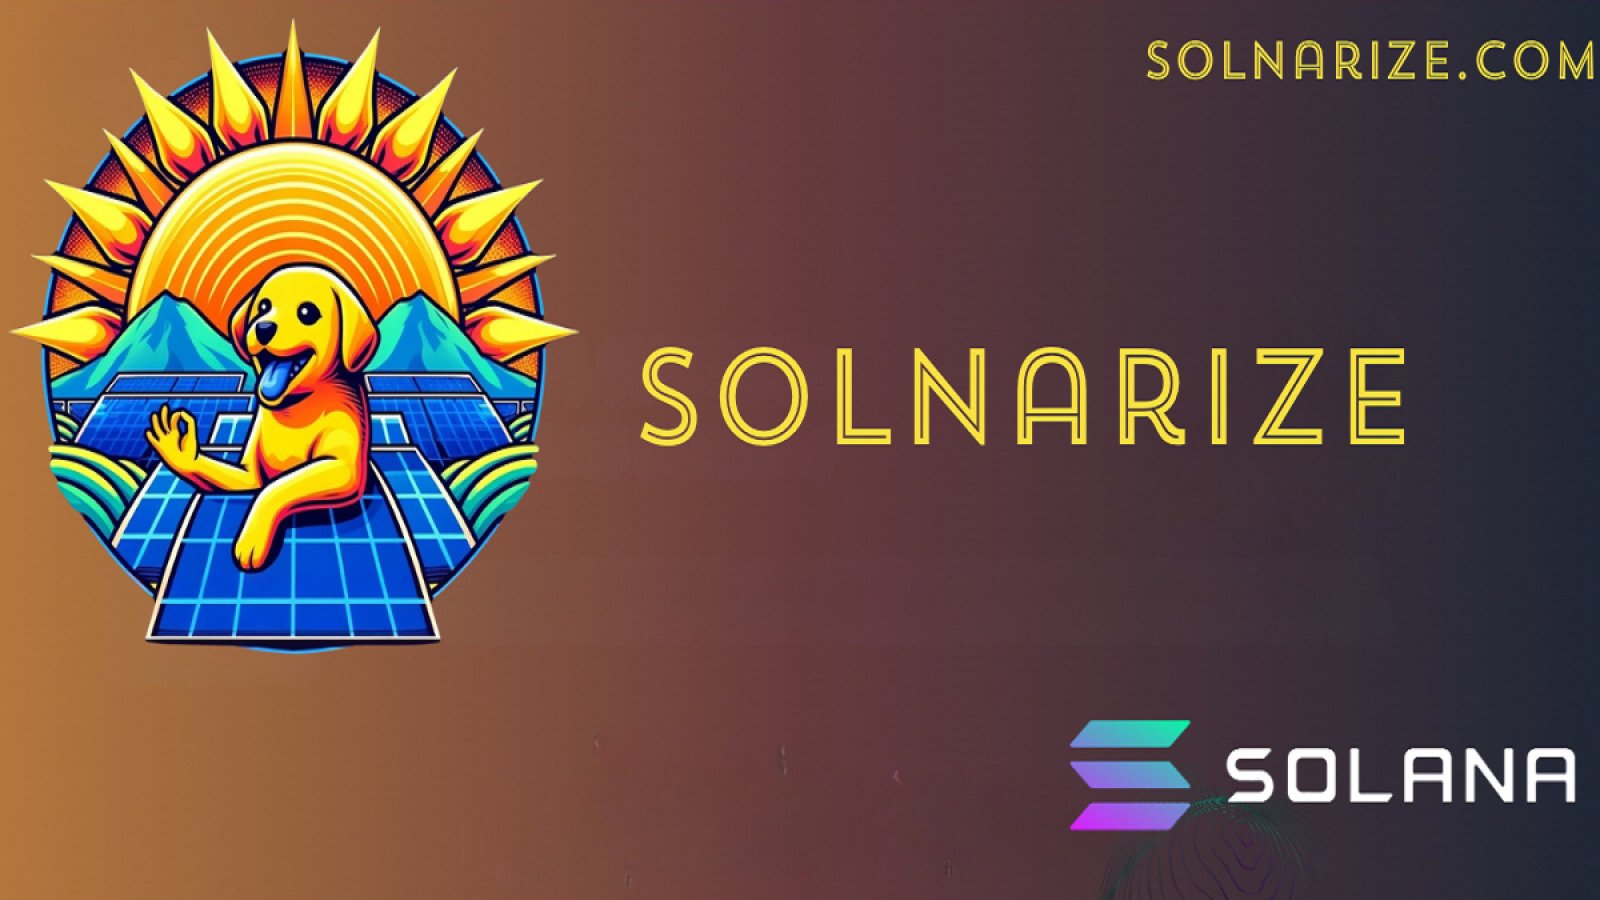 Solnarize Launches Presale, Raises Over 200 SOL Within Minutes